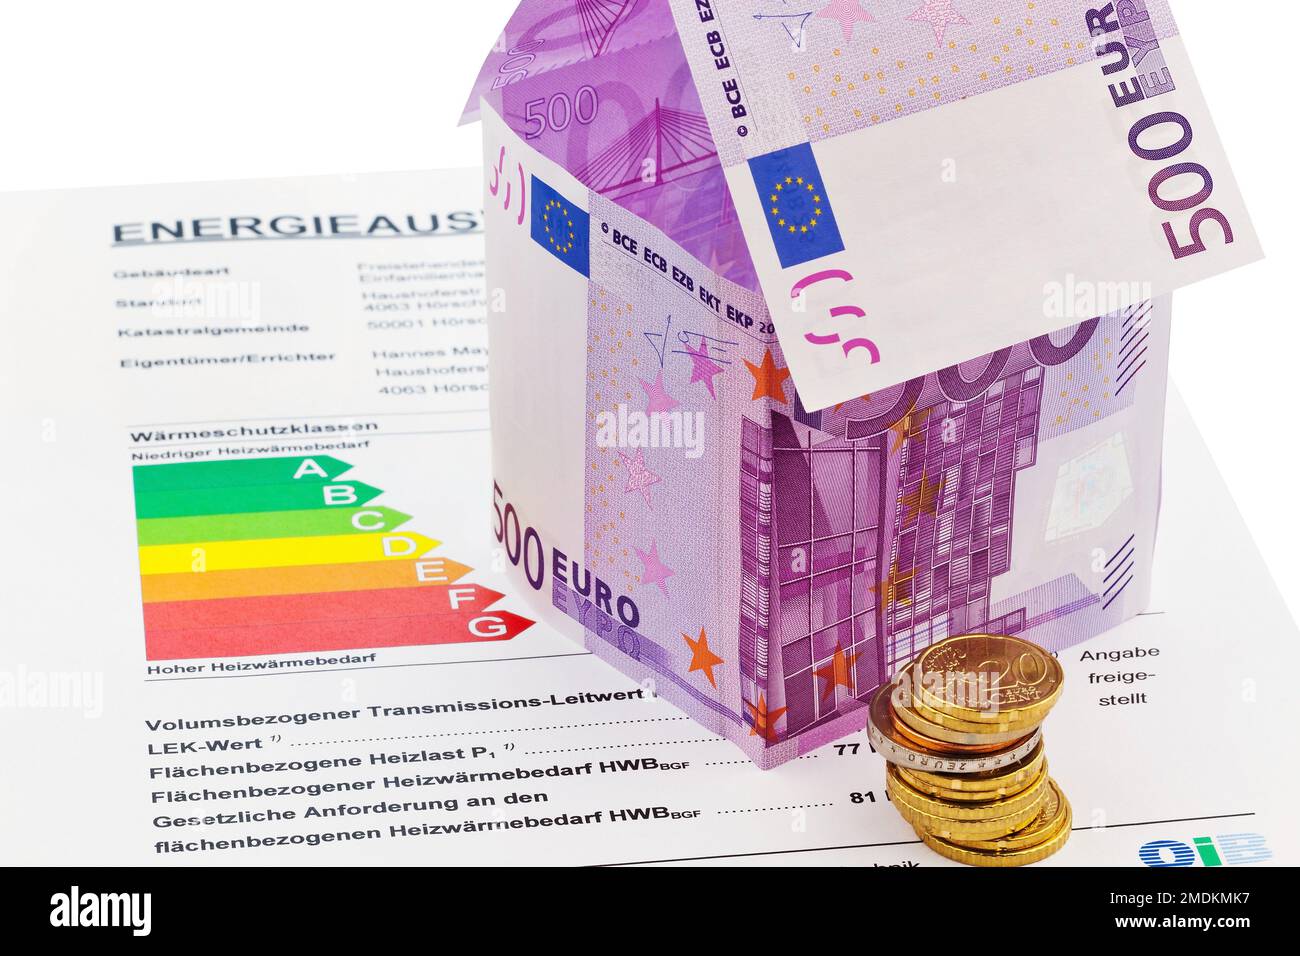 house made of Euro notes and energy certificate, Austria Stock Photo